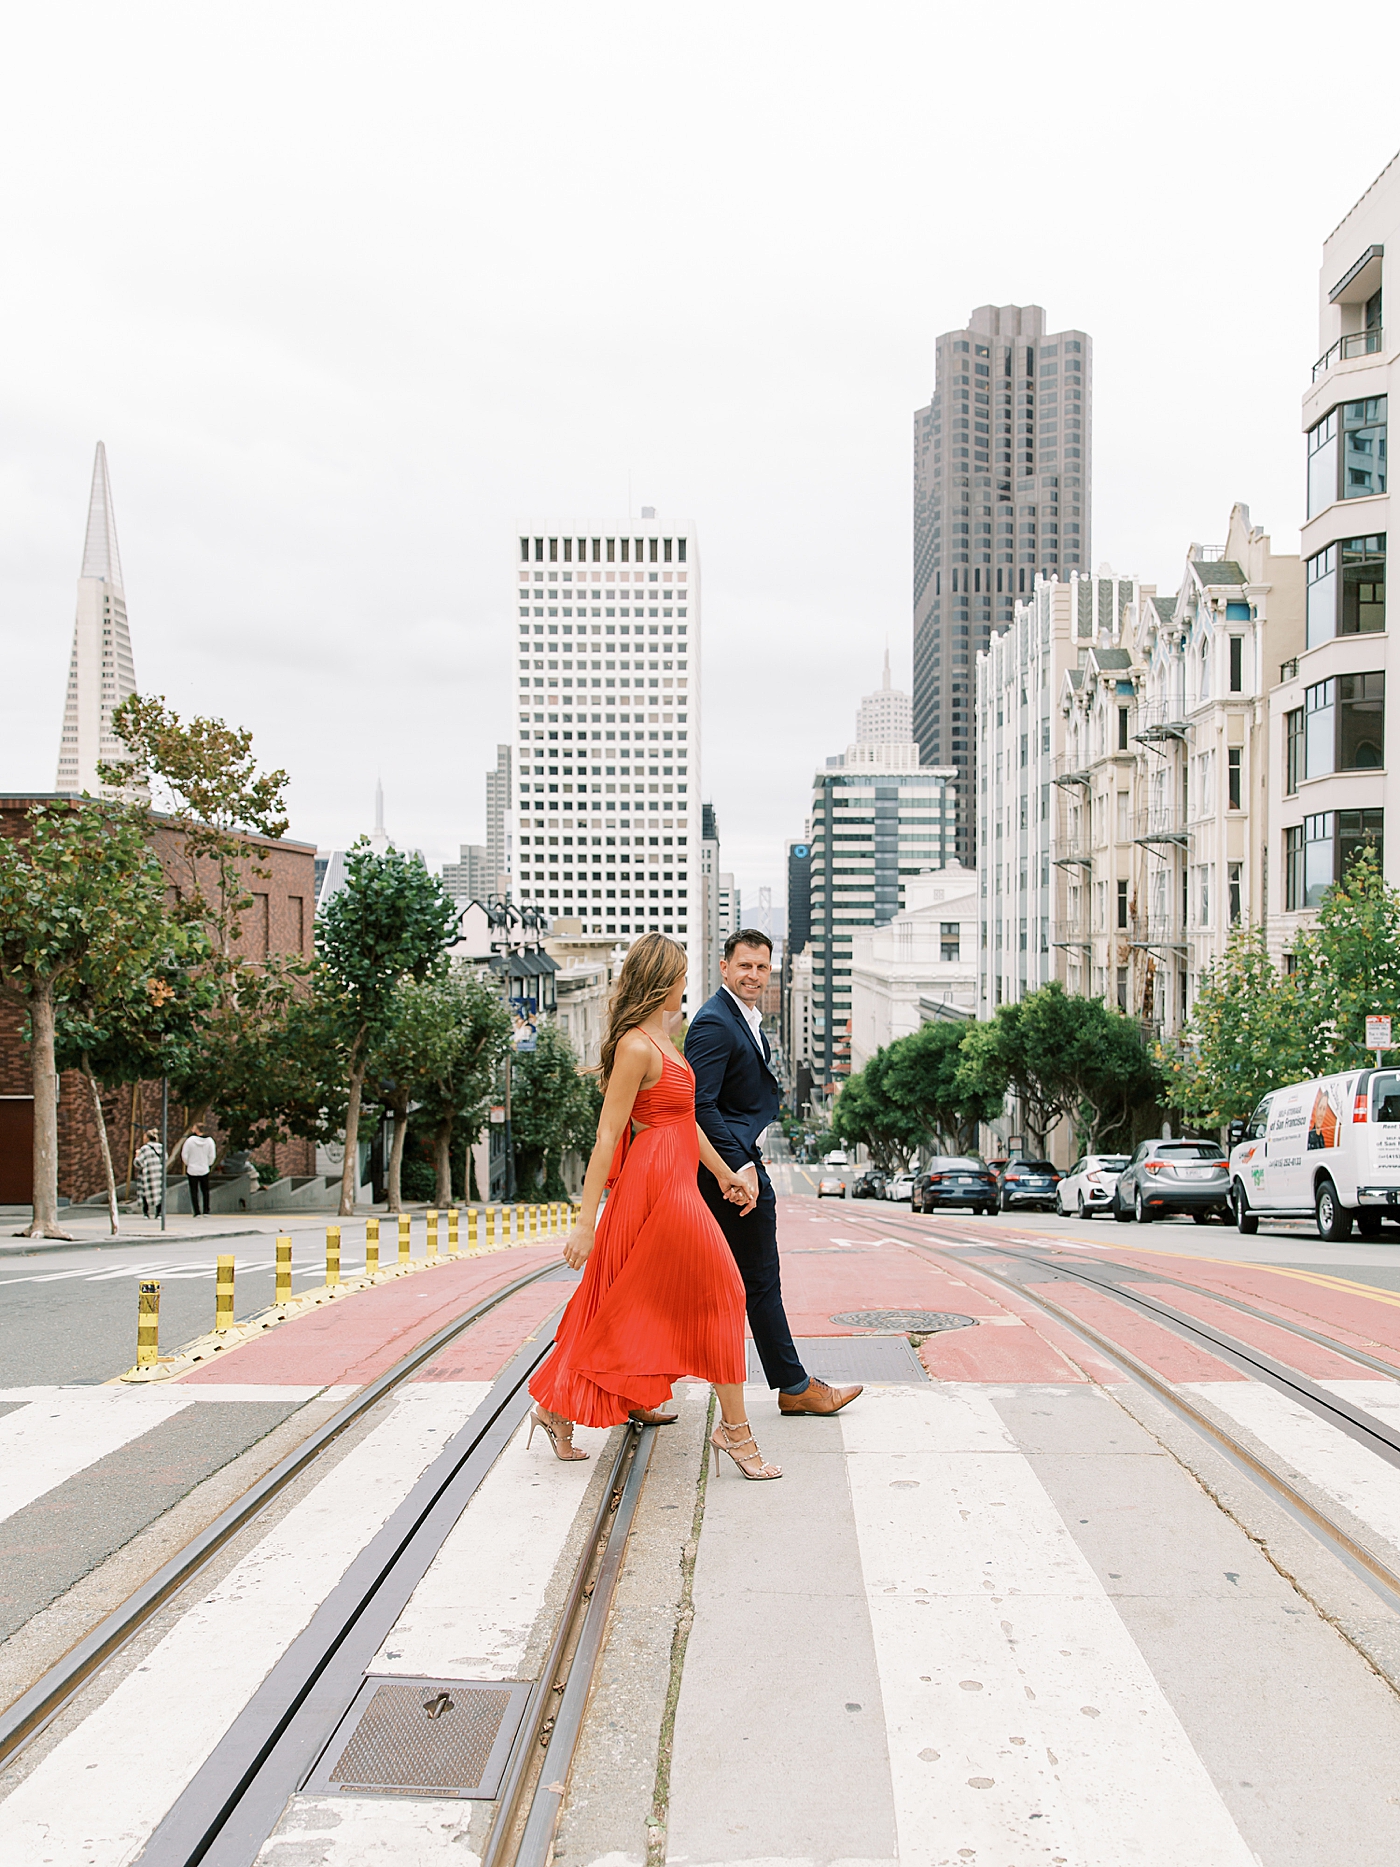 Couple in black and red walking through San Francisco | Photo by Diane Sotero